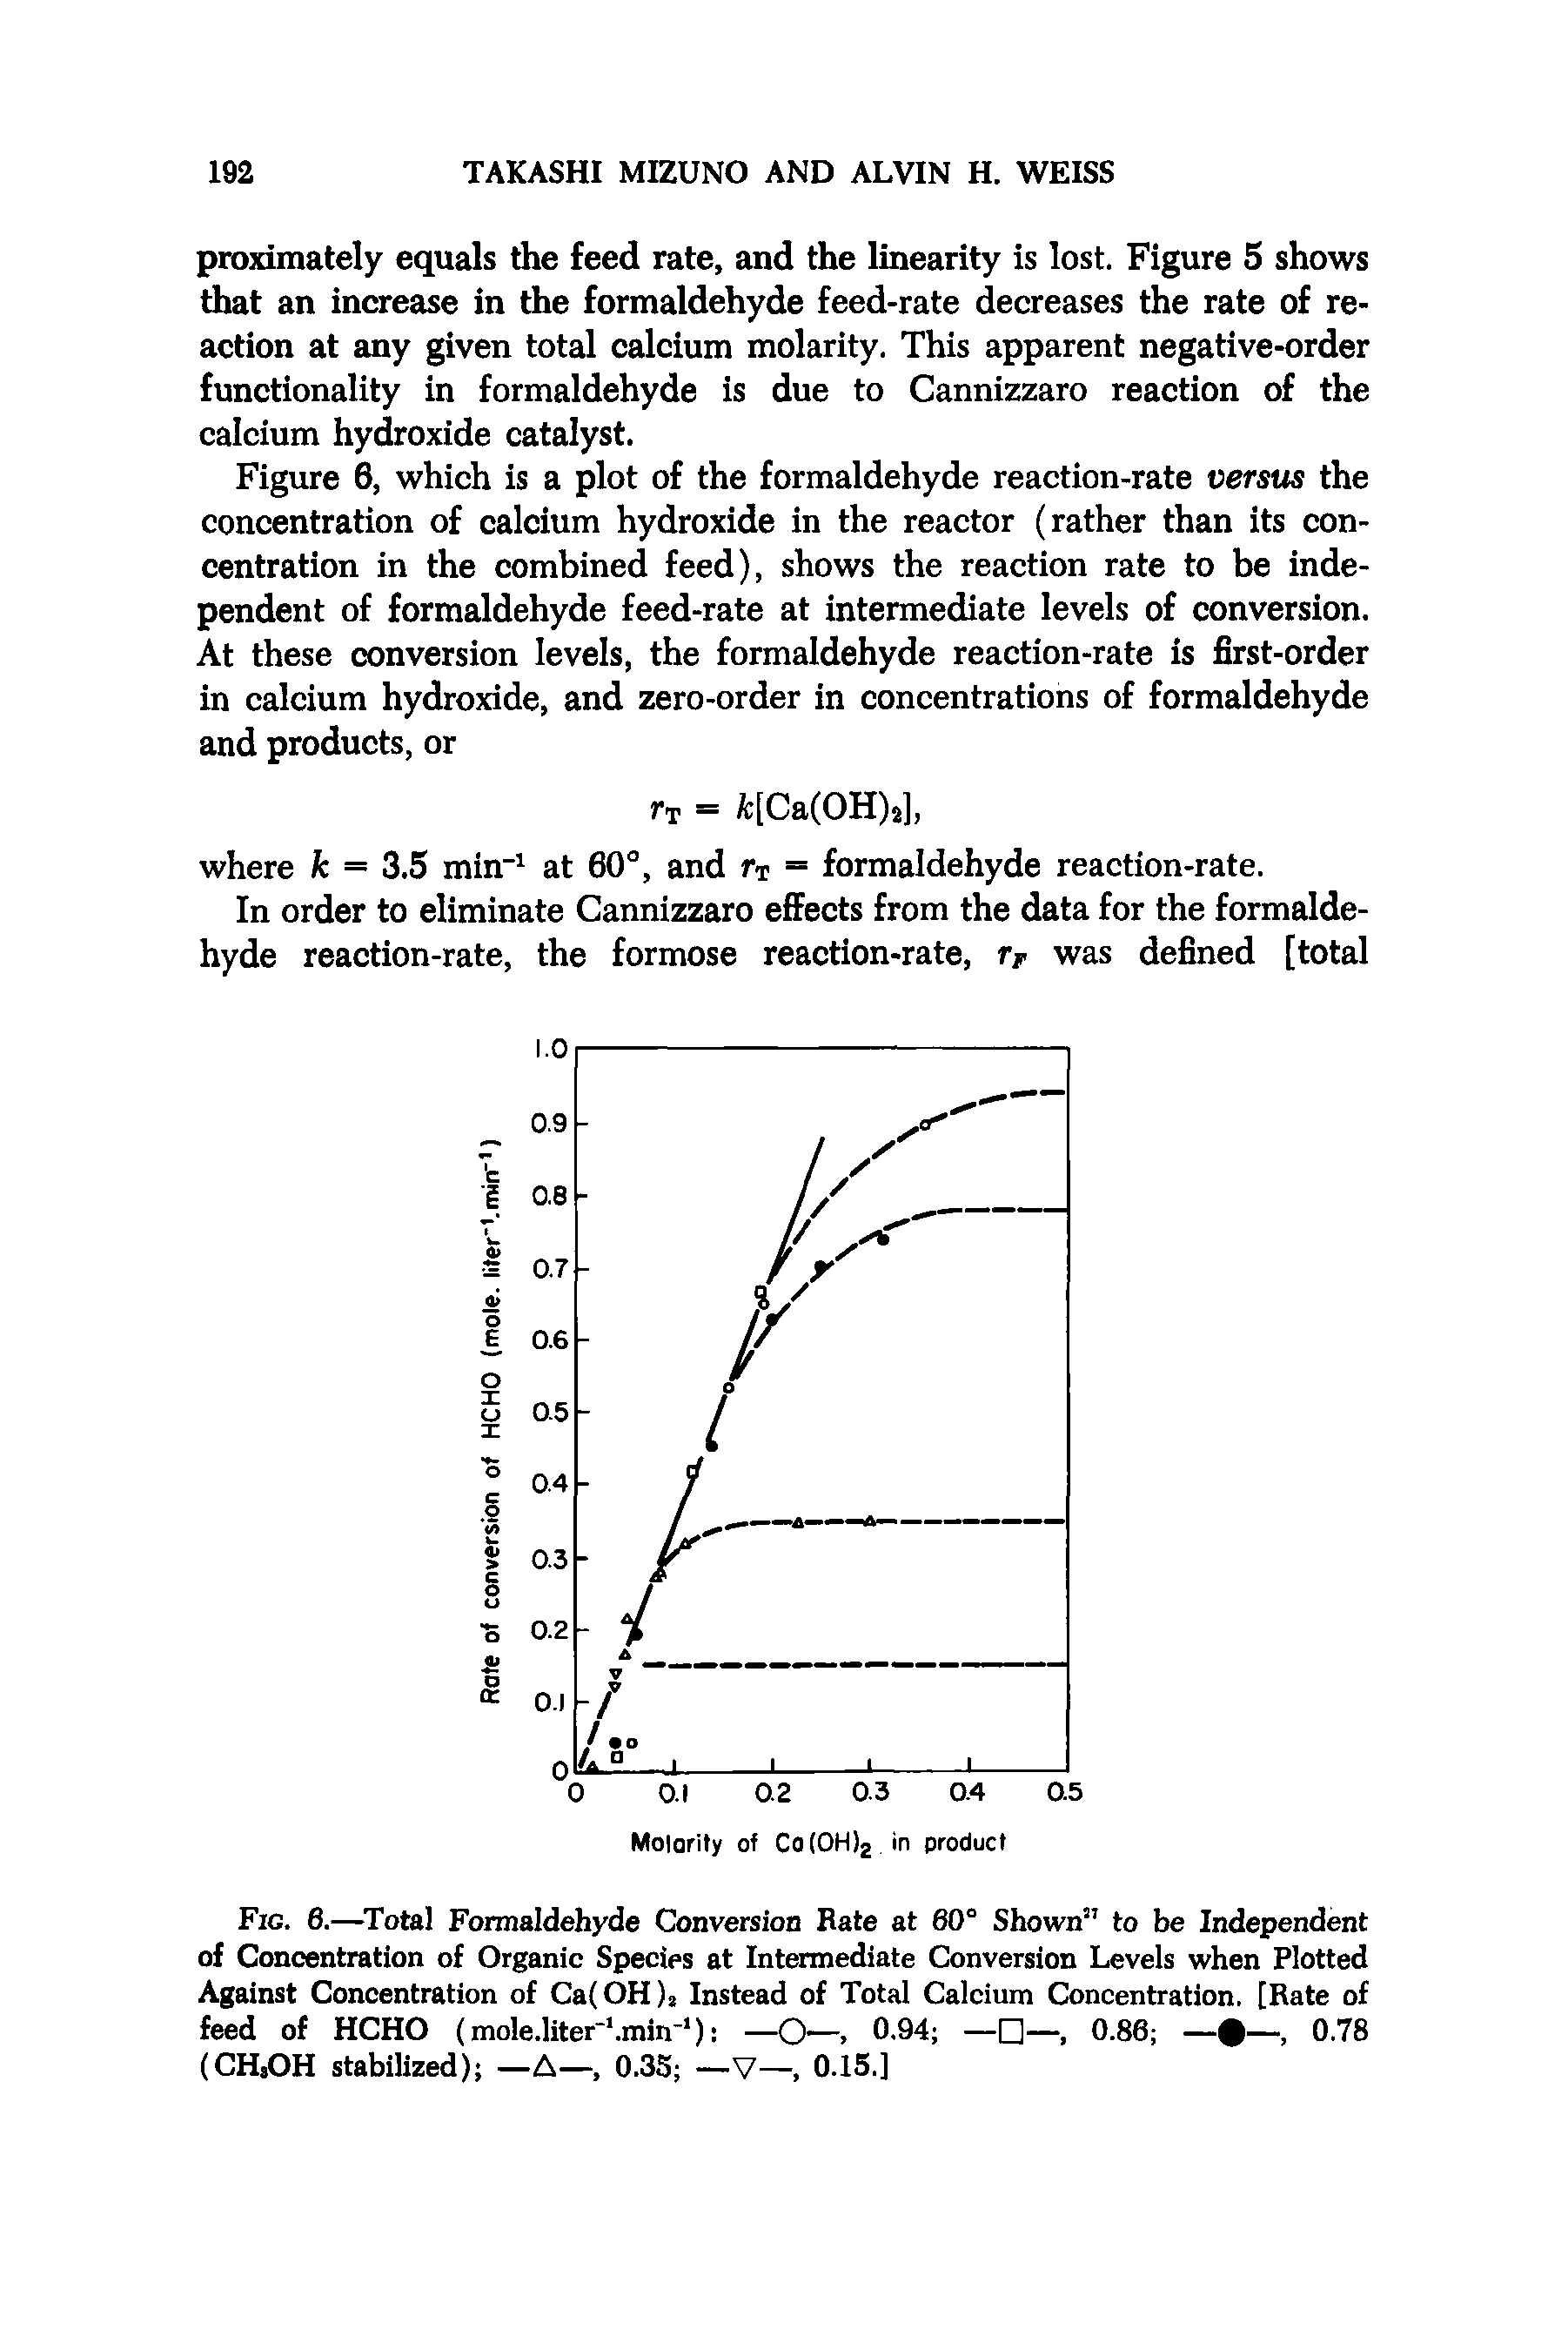 Fig. 6.— Total Formaldehyde Conversion Bate at 60° Shown to be Independent of Concentration of Organic Species at Intermediate Conversion Levels when Plotted Against Concentration of Ca(OH)s Instead of Total Calcium Concentration. [Rate of feed of HCHO (mole.liter .min ) —O—. 0.94 — —, 0.86 —%—, 0.78 (CH3OH stabilized) —A—, 0.3S —V—, 0.15.]...